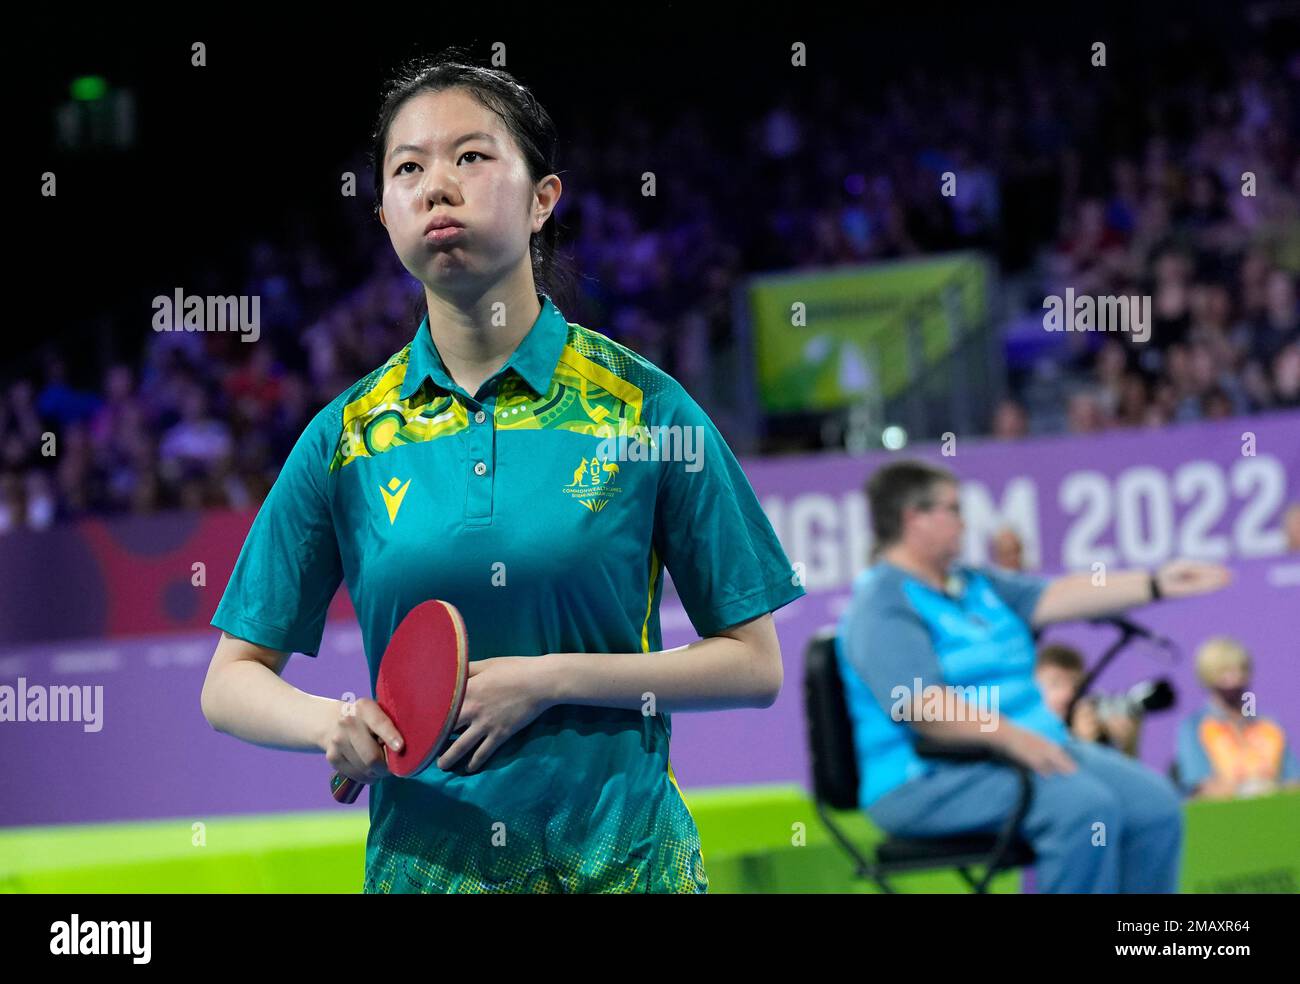 Australias Yangzi Liu reacts after winning a match during the womens bronze medal table tennis match against Indias Sreeja Akula at the Commonwealth Games in Birmingham, England, Sunday, Aug